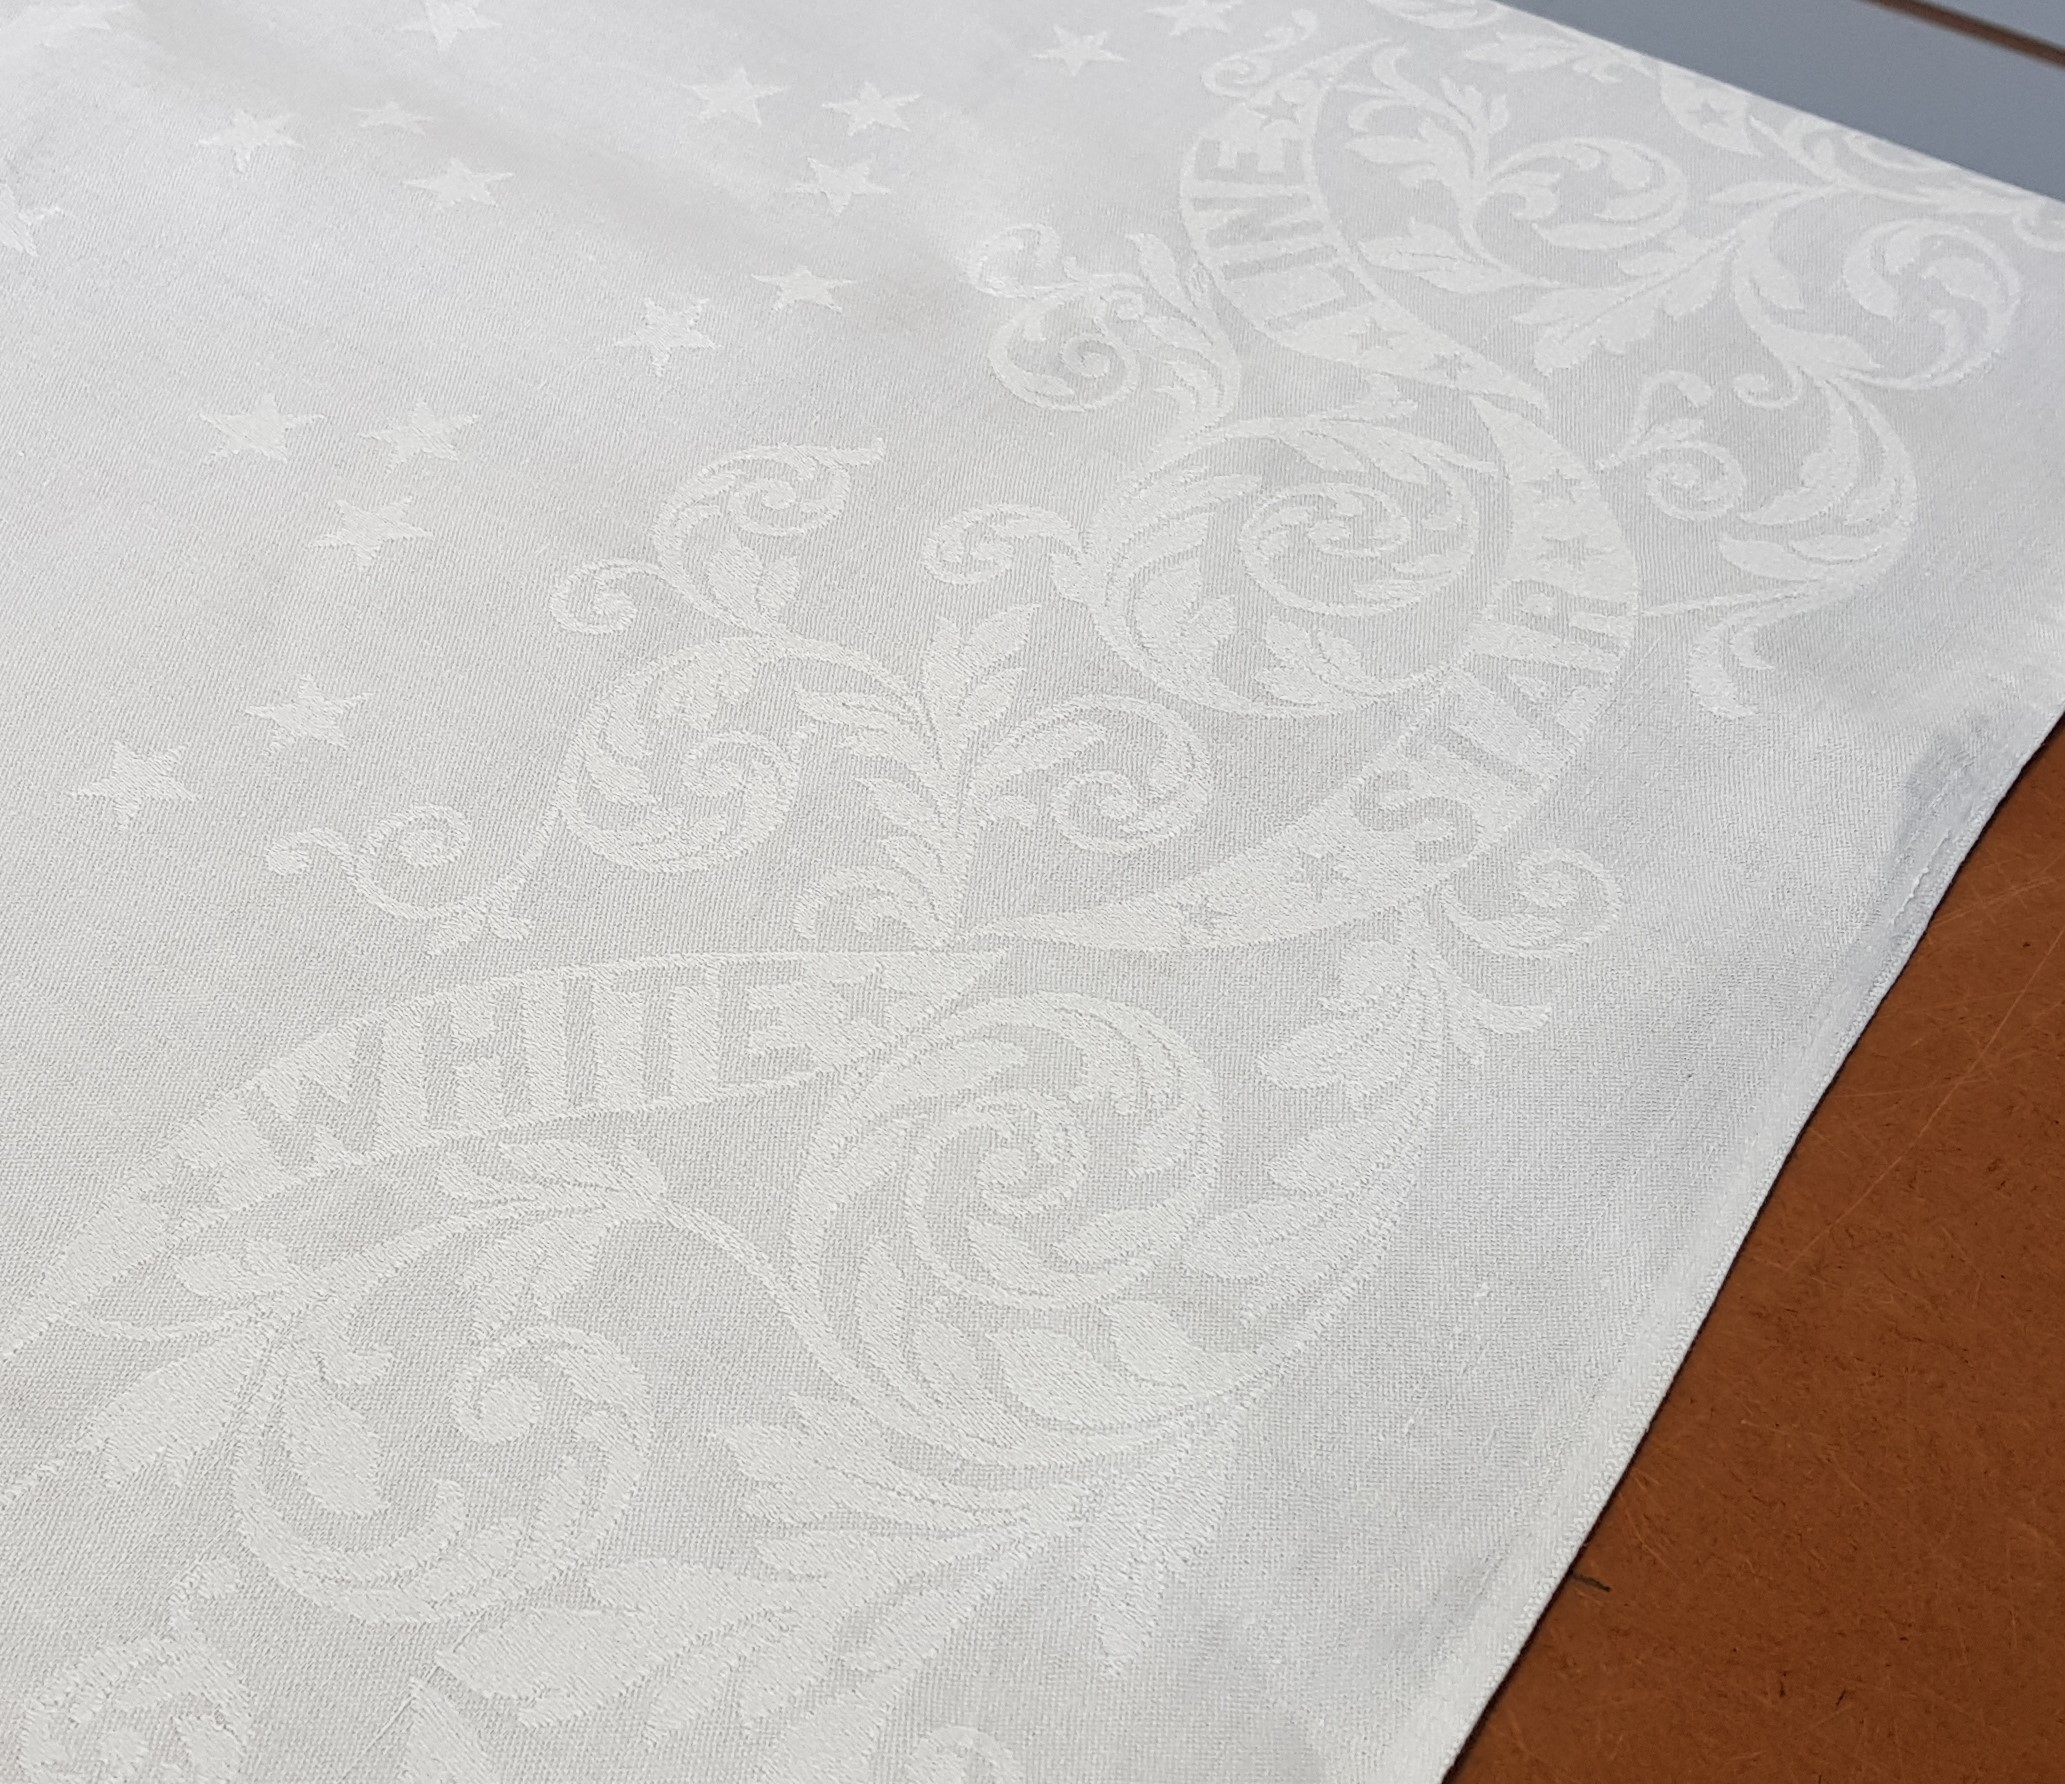 WHITE STAR LINE TABLE CLOTH (68''X 55'' APPROX) - Image 3 of 3